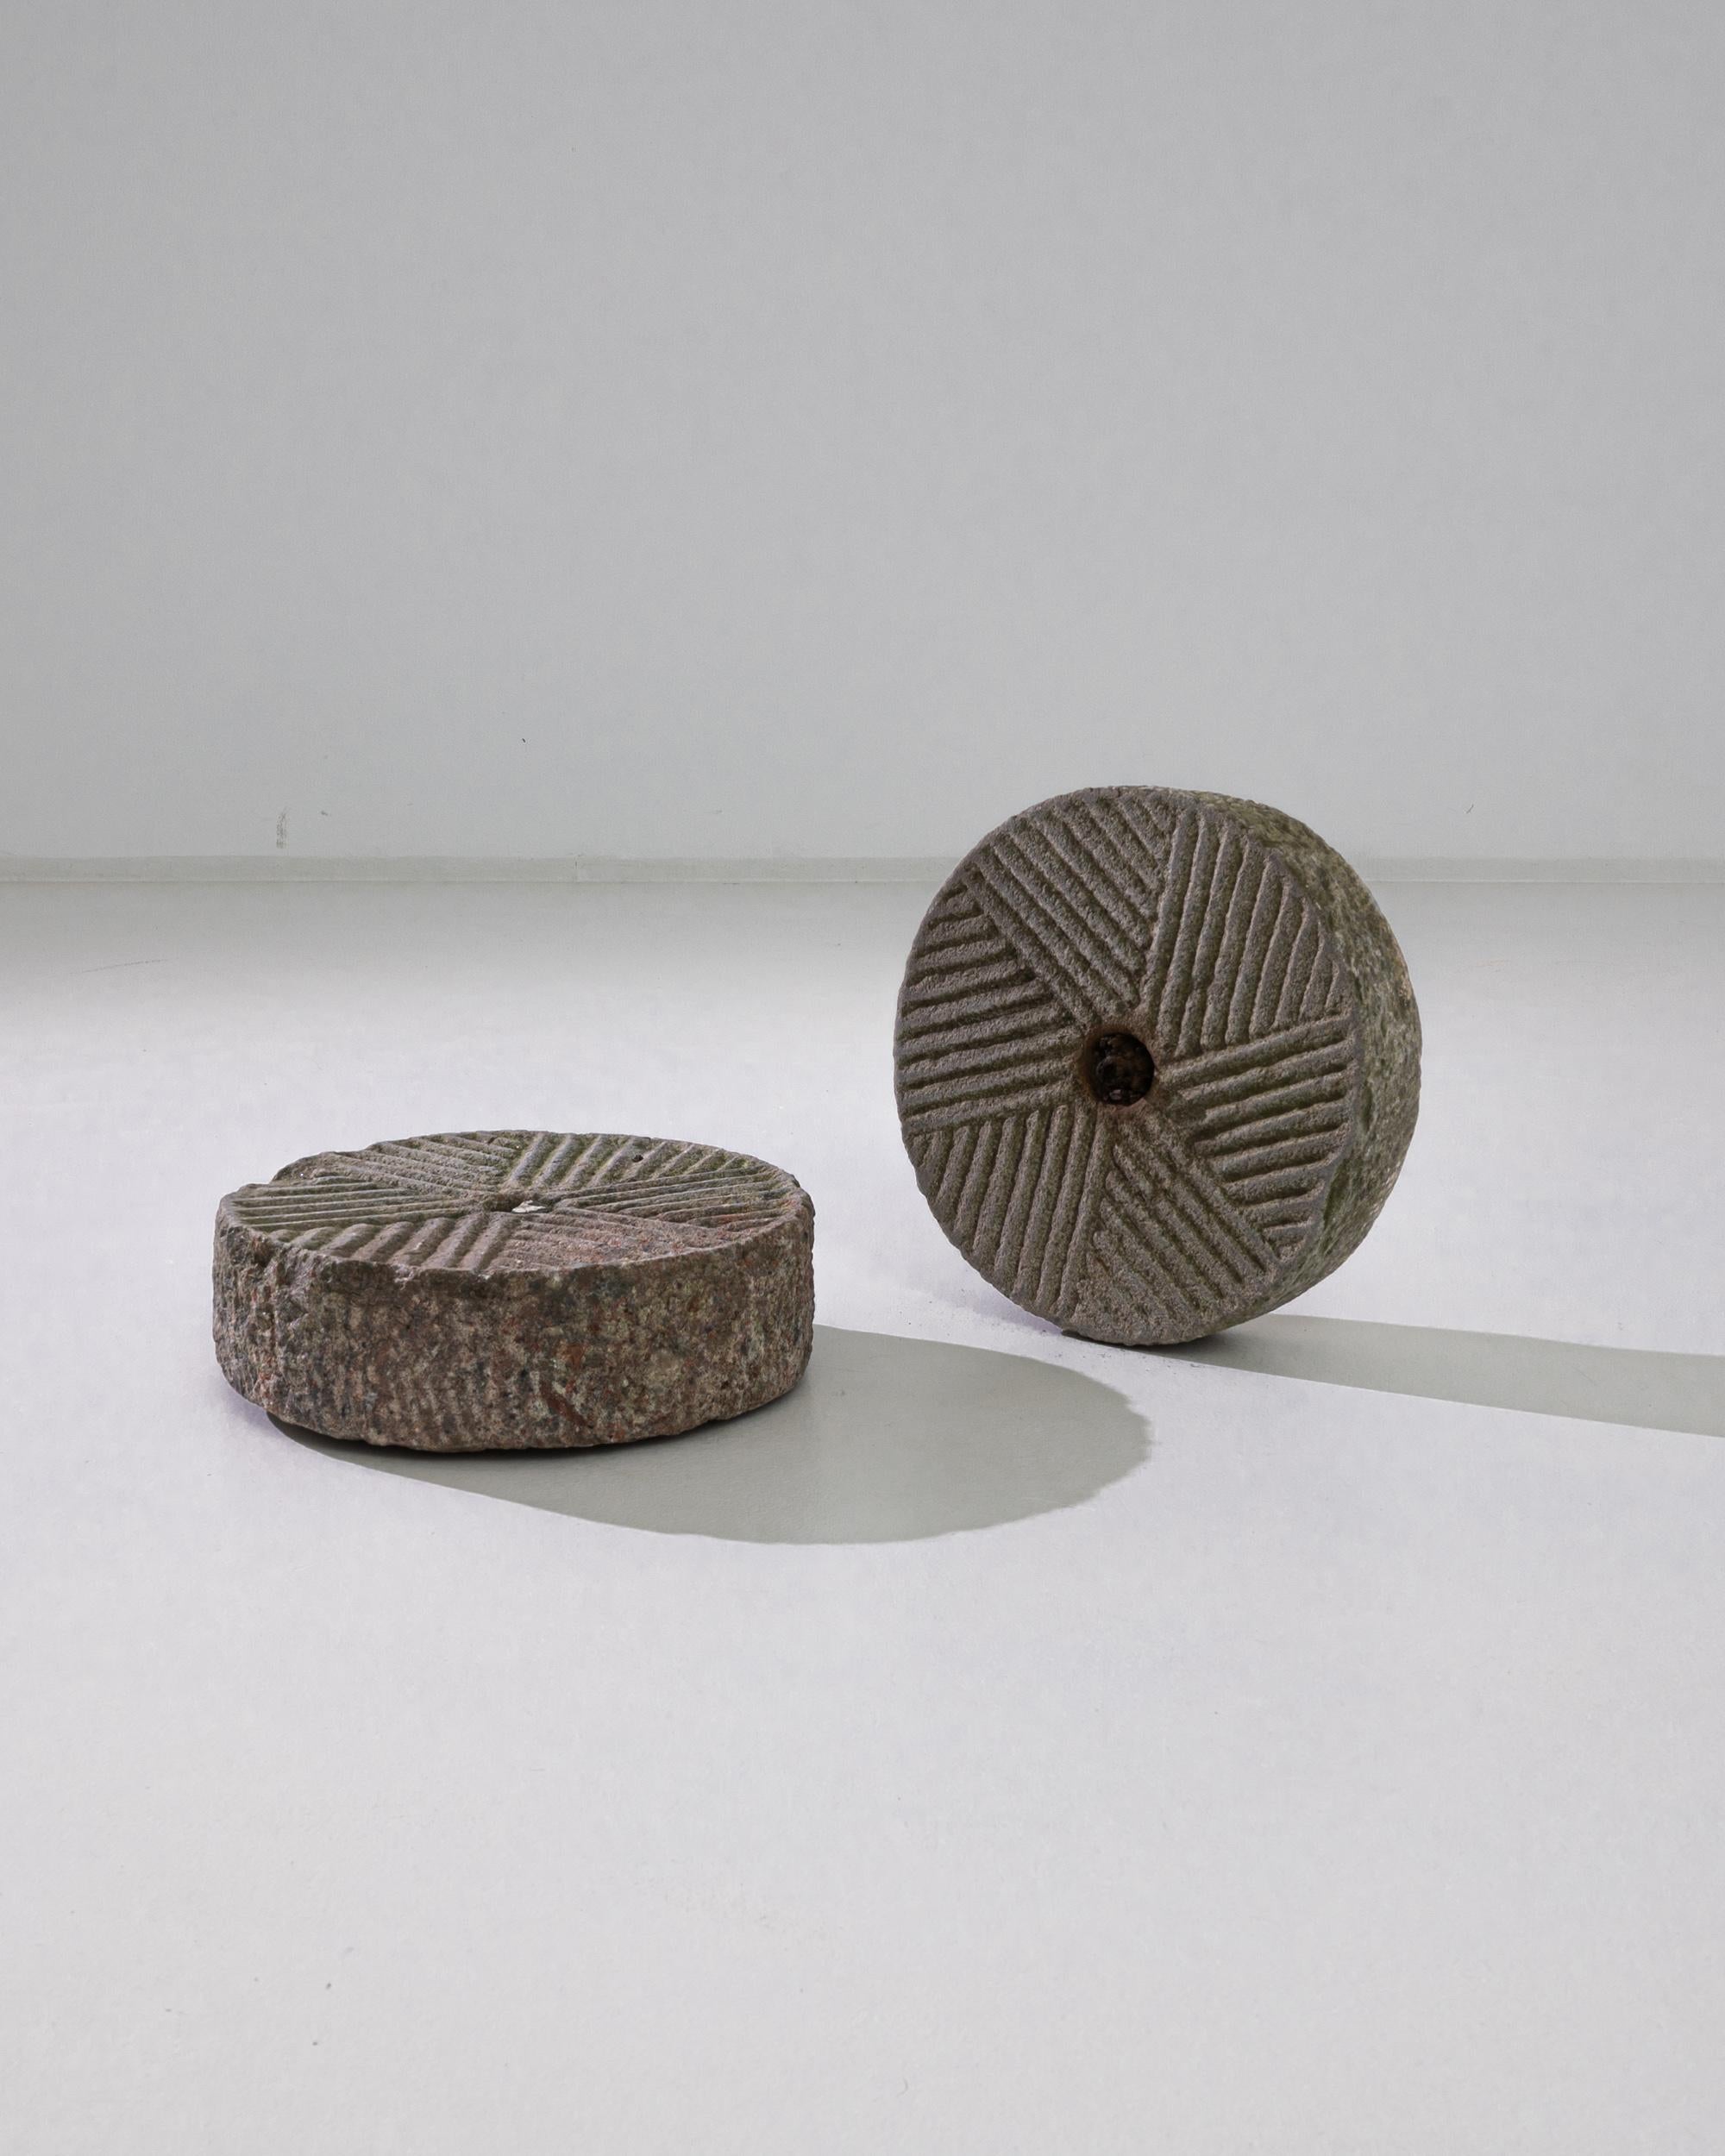 A pair of antique grindstones from China, produced circa 1900. Stone wheels with beautifully patterned criss-crossing ridges radiating out from the center, turning them into two facing suns. Traces of long gone grinds remain in the ridges as ruddy